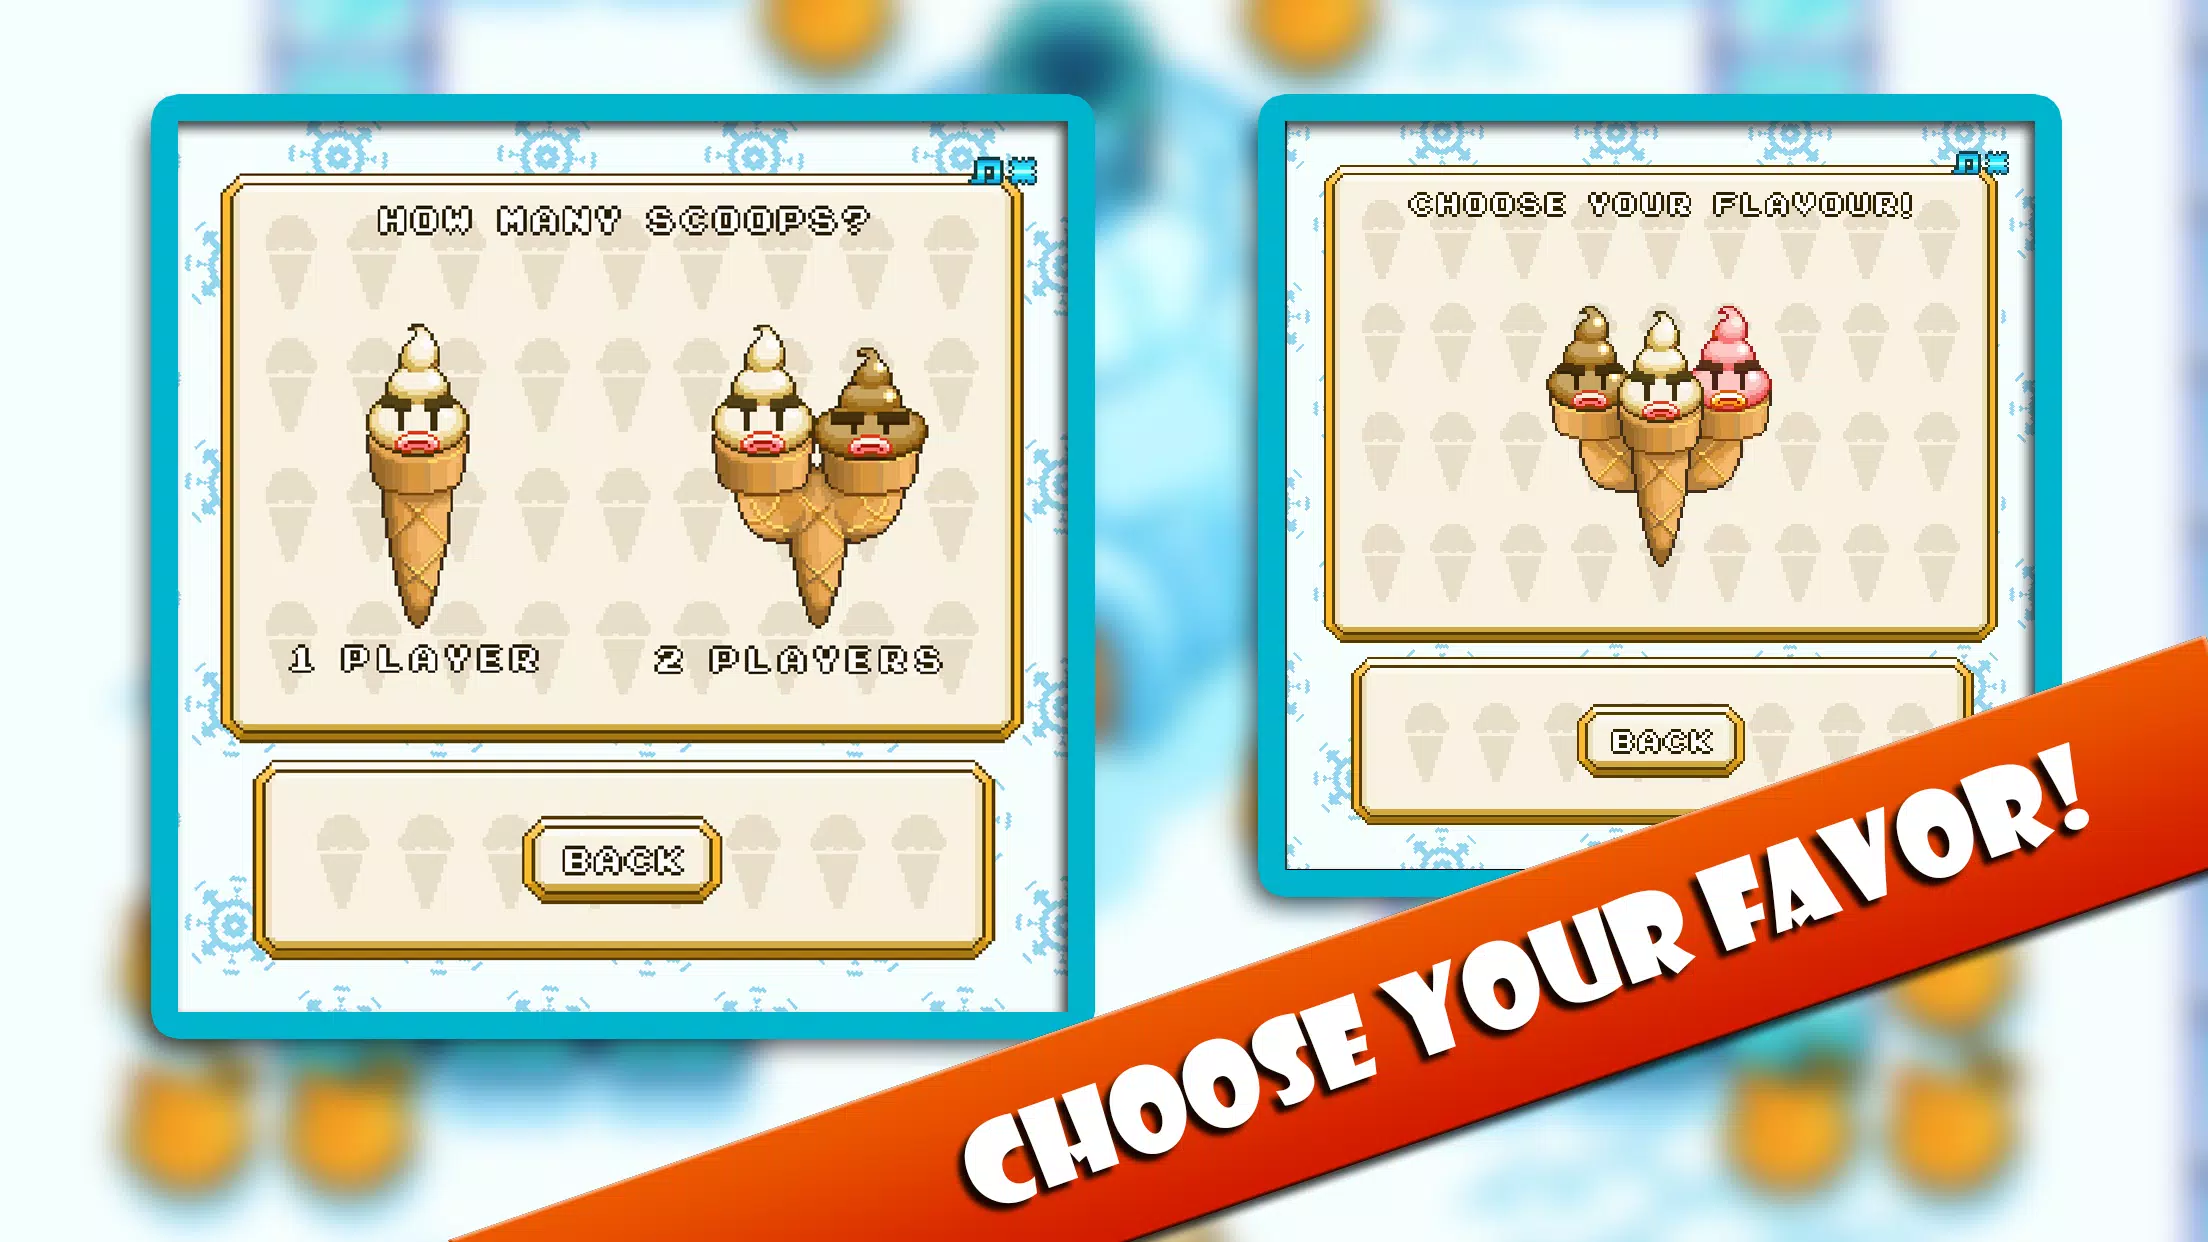 Bad Ice Cream 2: Icy Maze Game Apk Download for Android- Latest version 1-  com.bin.bad.ice.cream2.mazegame